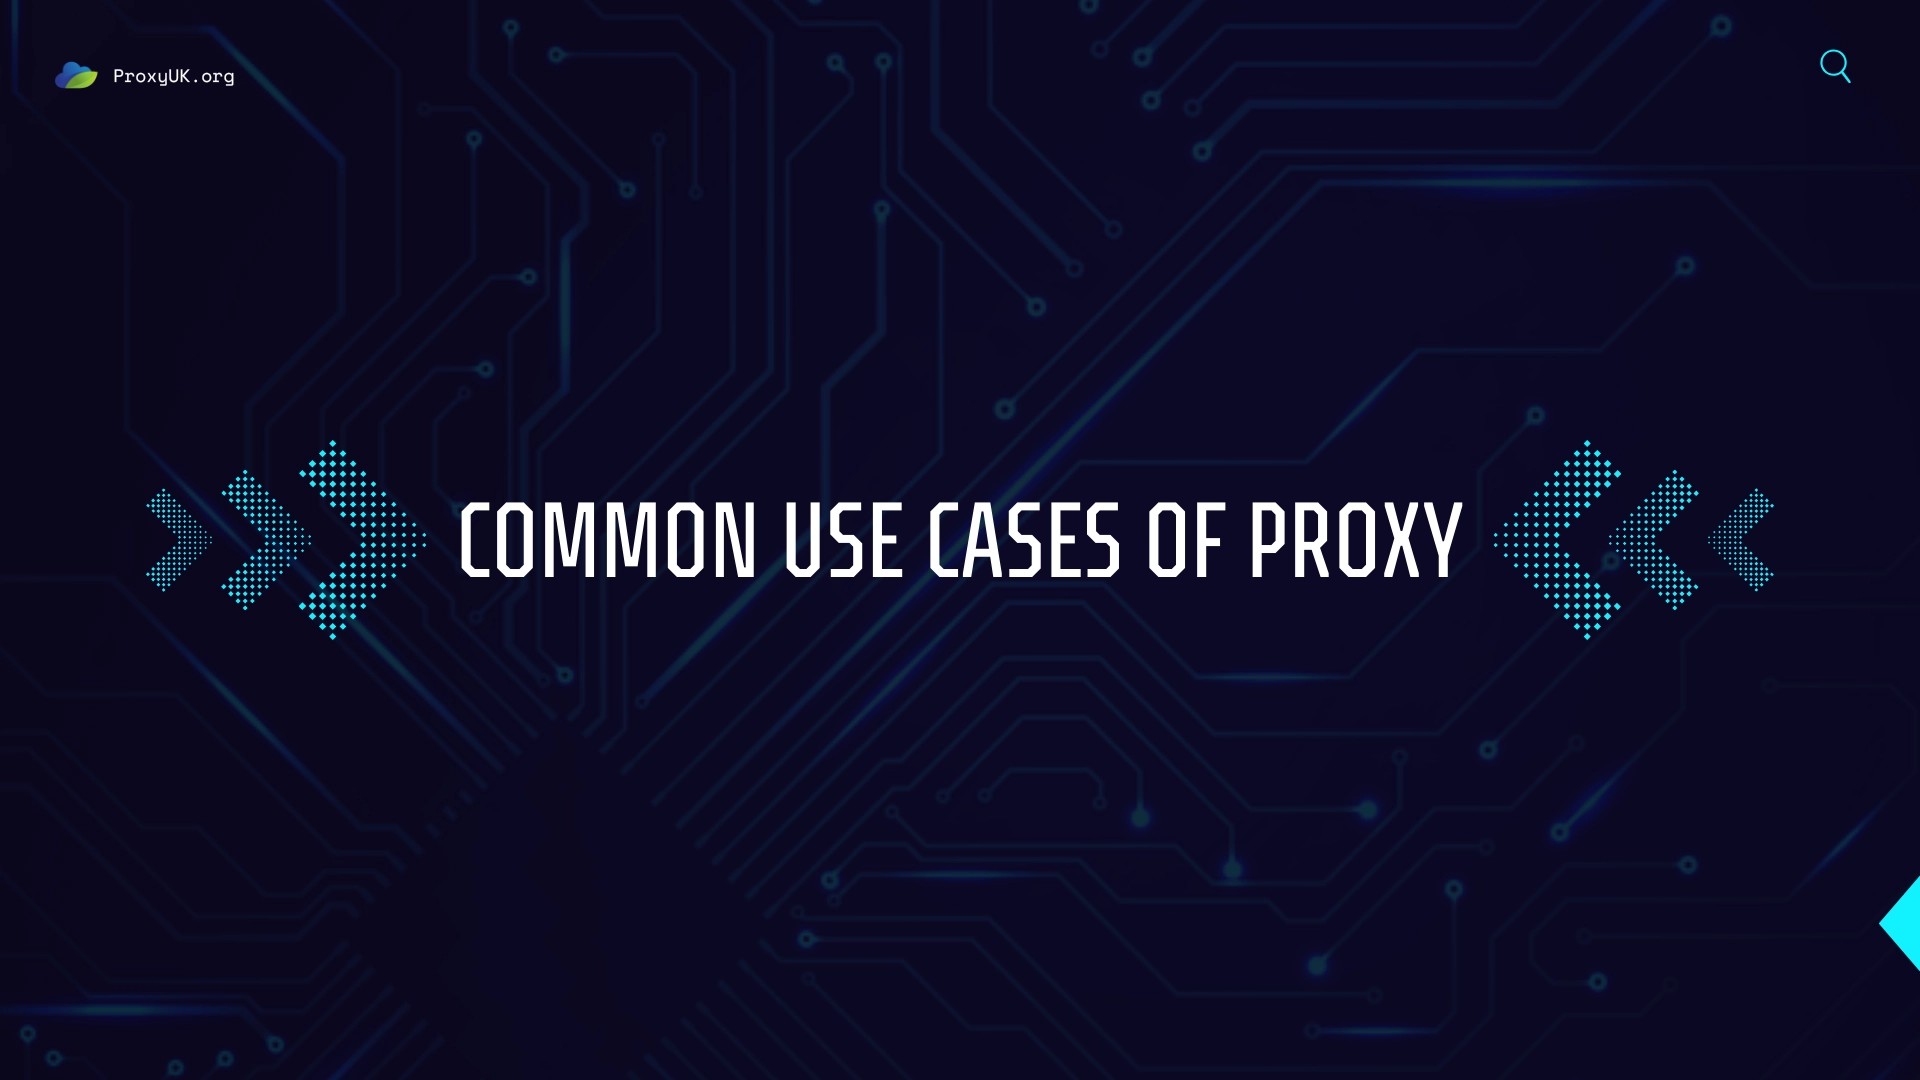 Common use cases of proxy